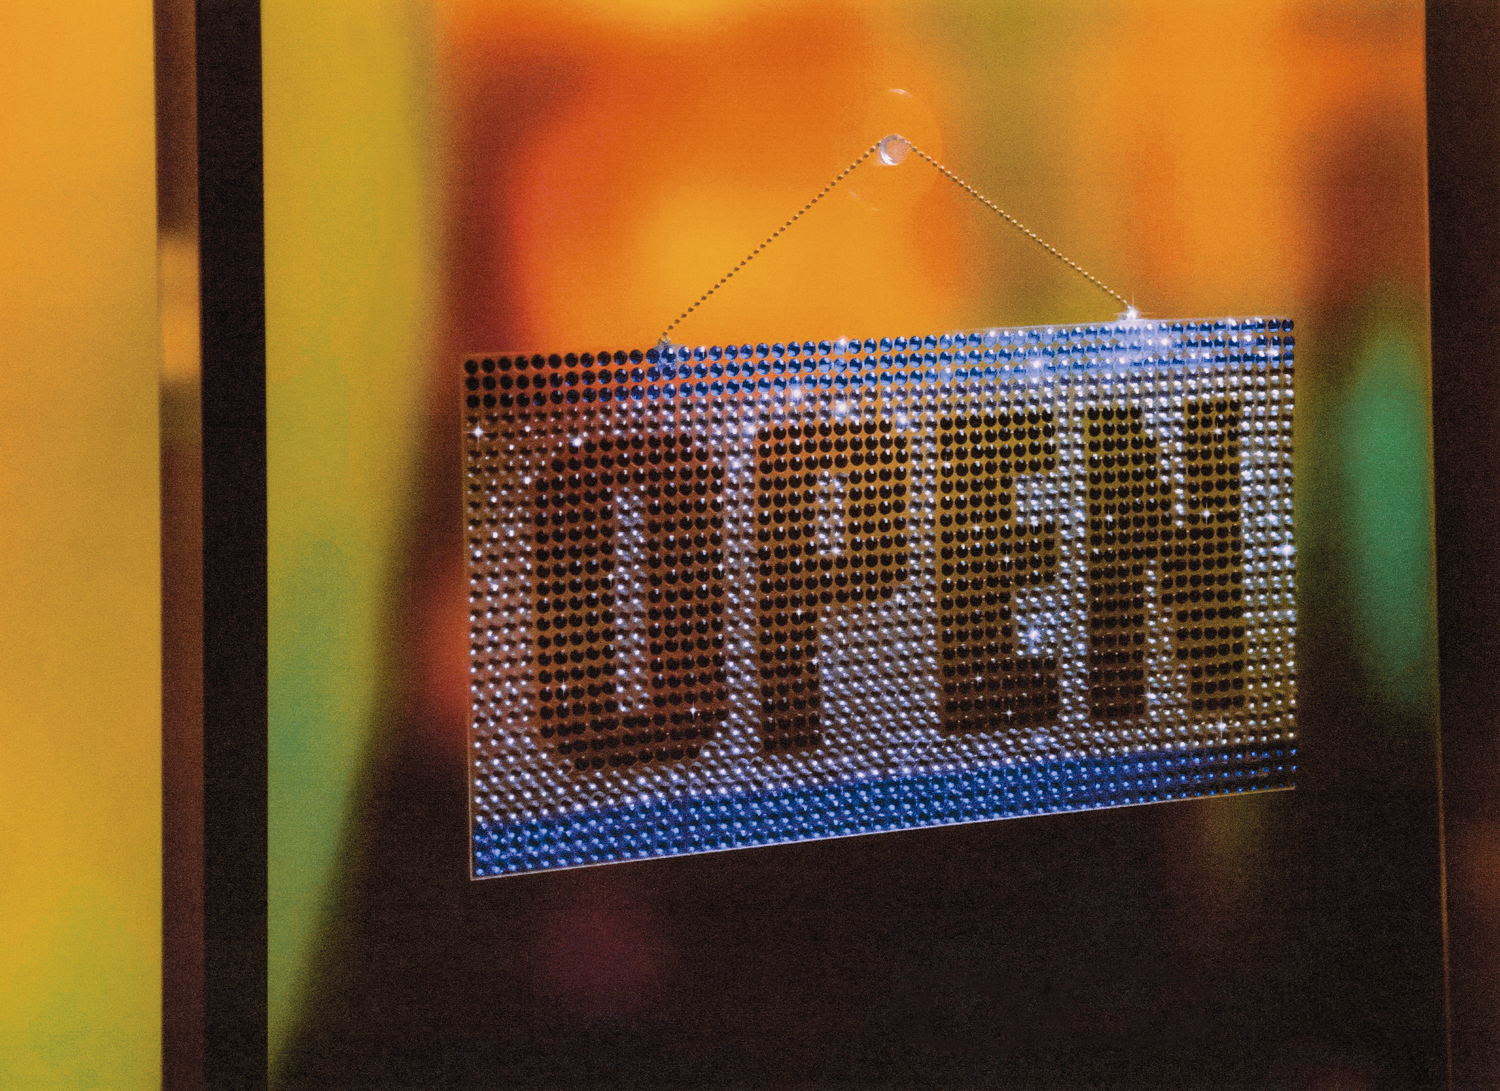 A blue and white sign with OPEN written in all black capitalized letters hangs in the window of a glass door, the sign is made of rhinestones.